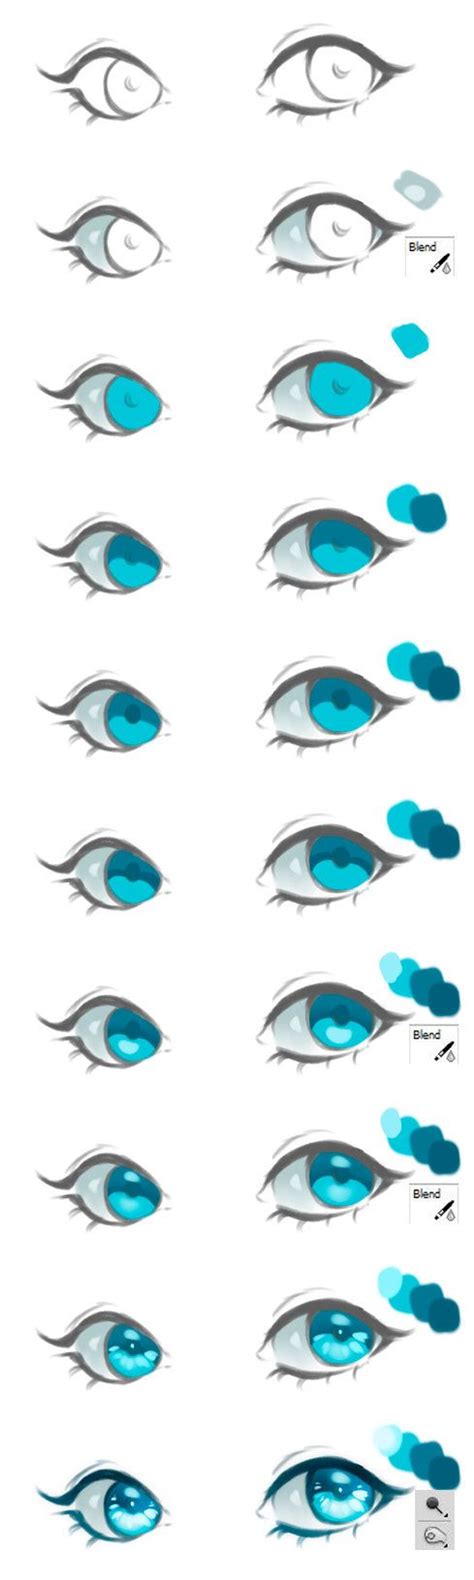 The Different Types Of Blue Eyes Are Shown In This Drawing Technique